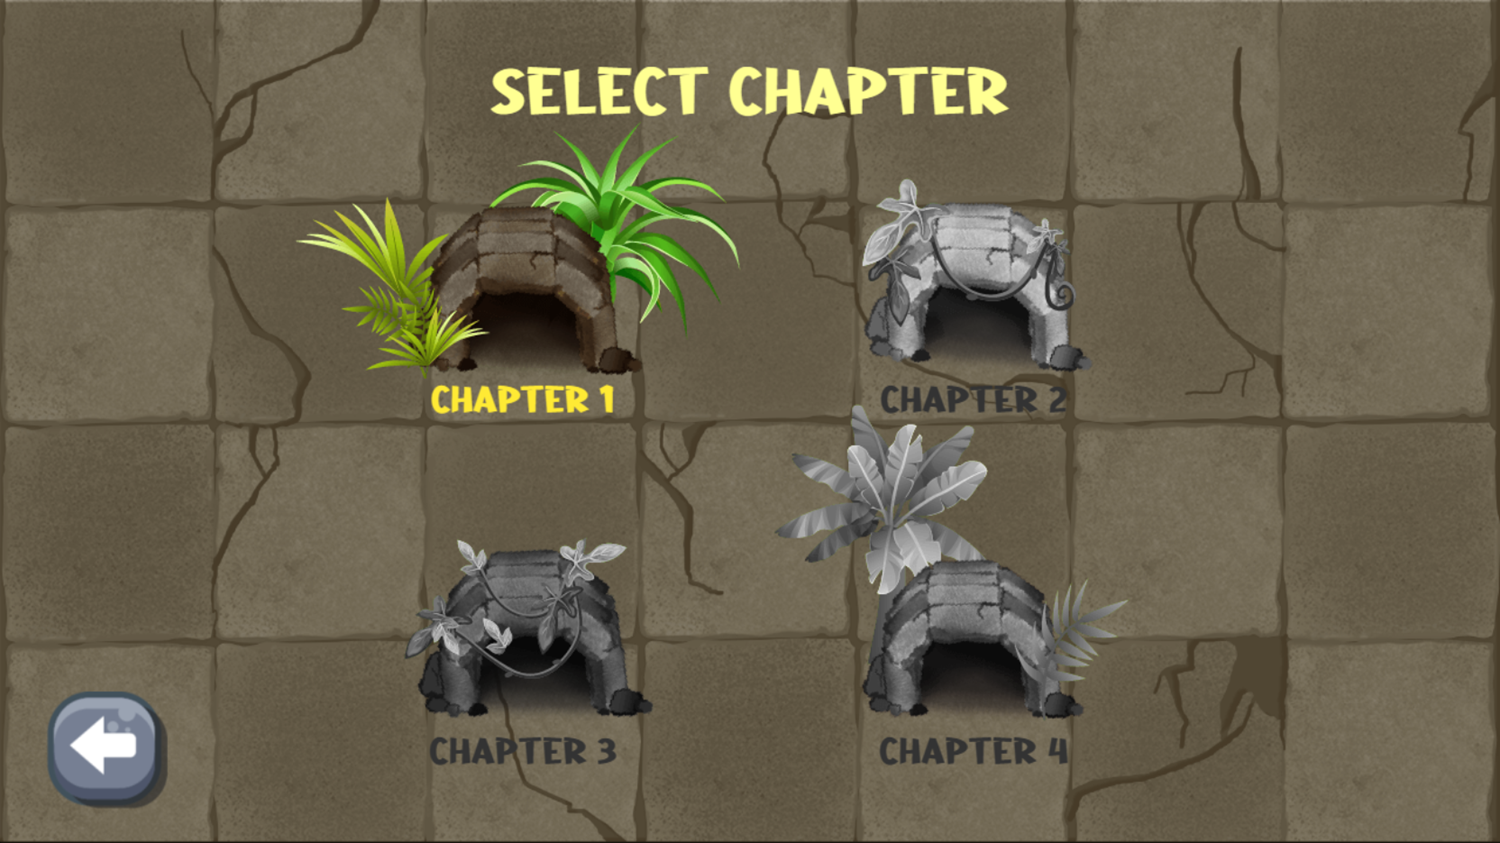 Marble Blast Game Select Chapter Screenshot.